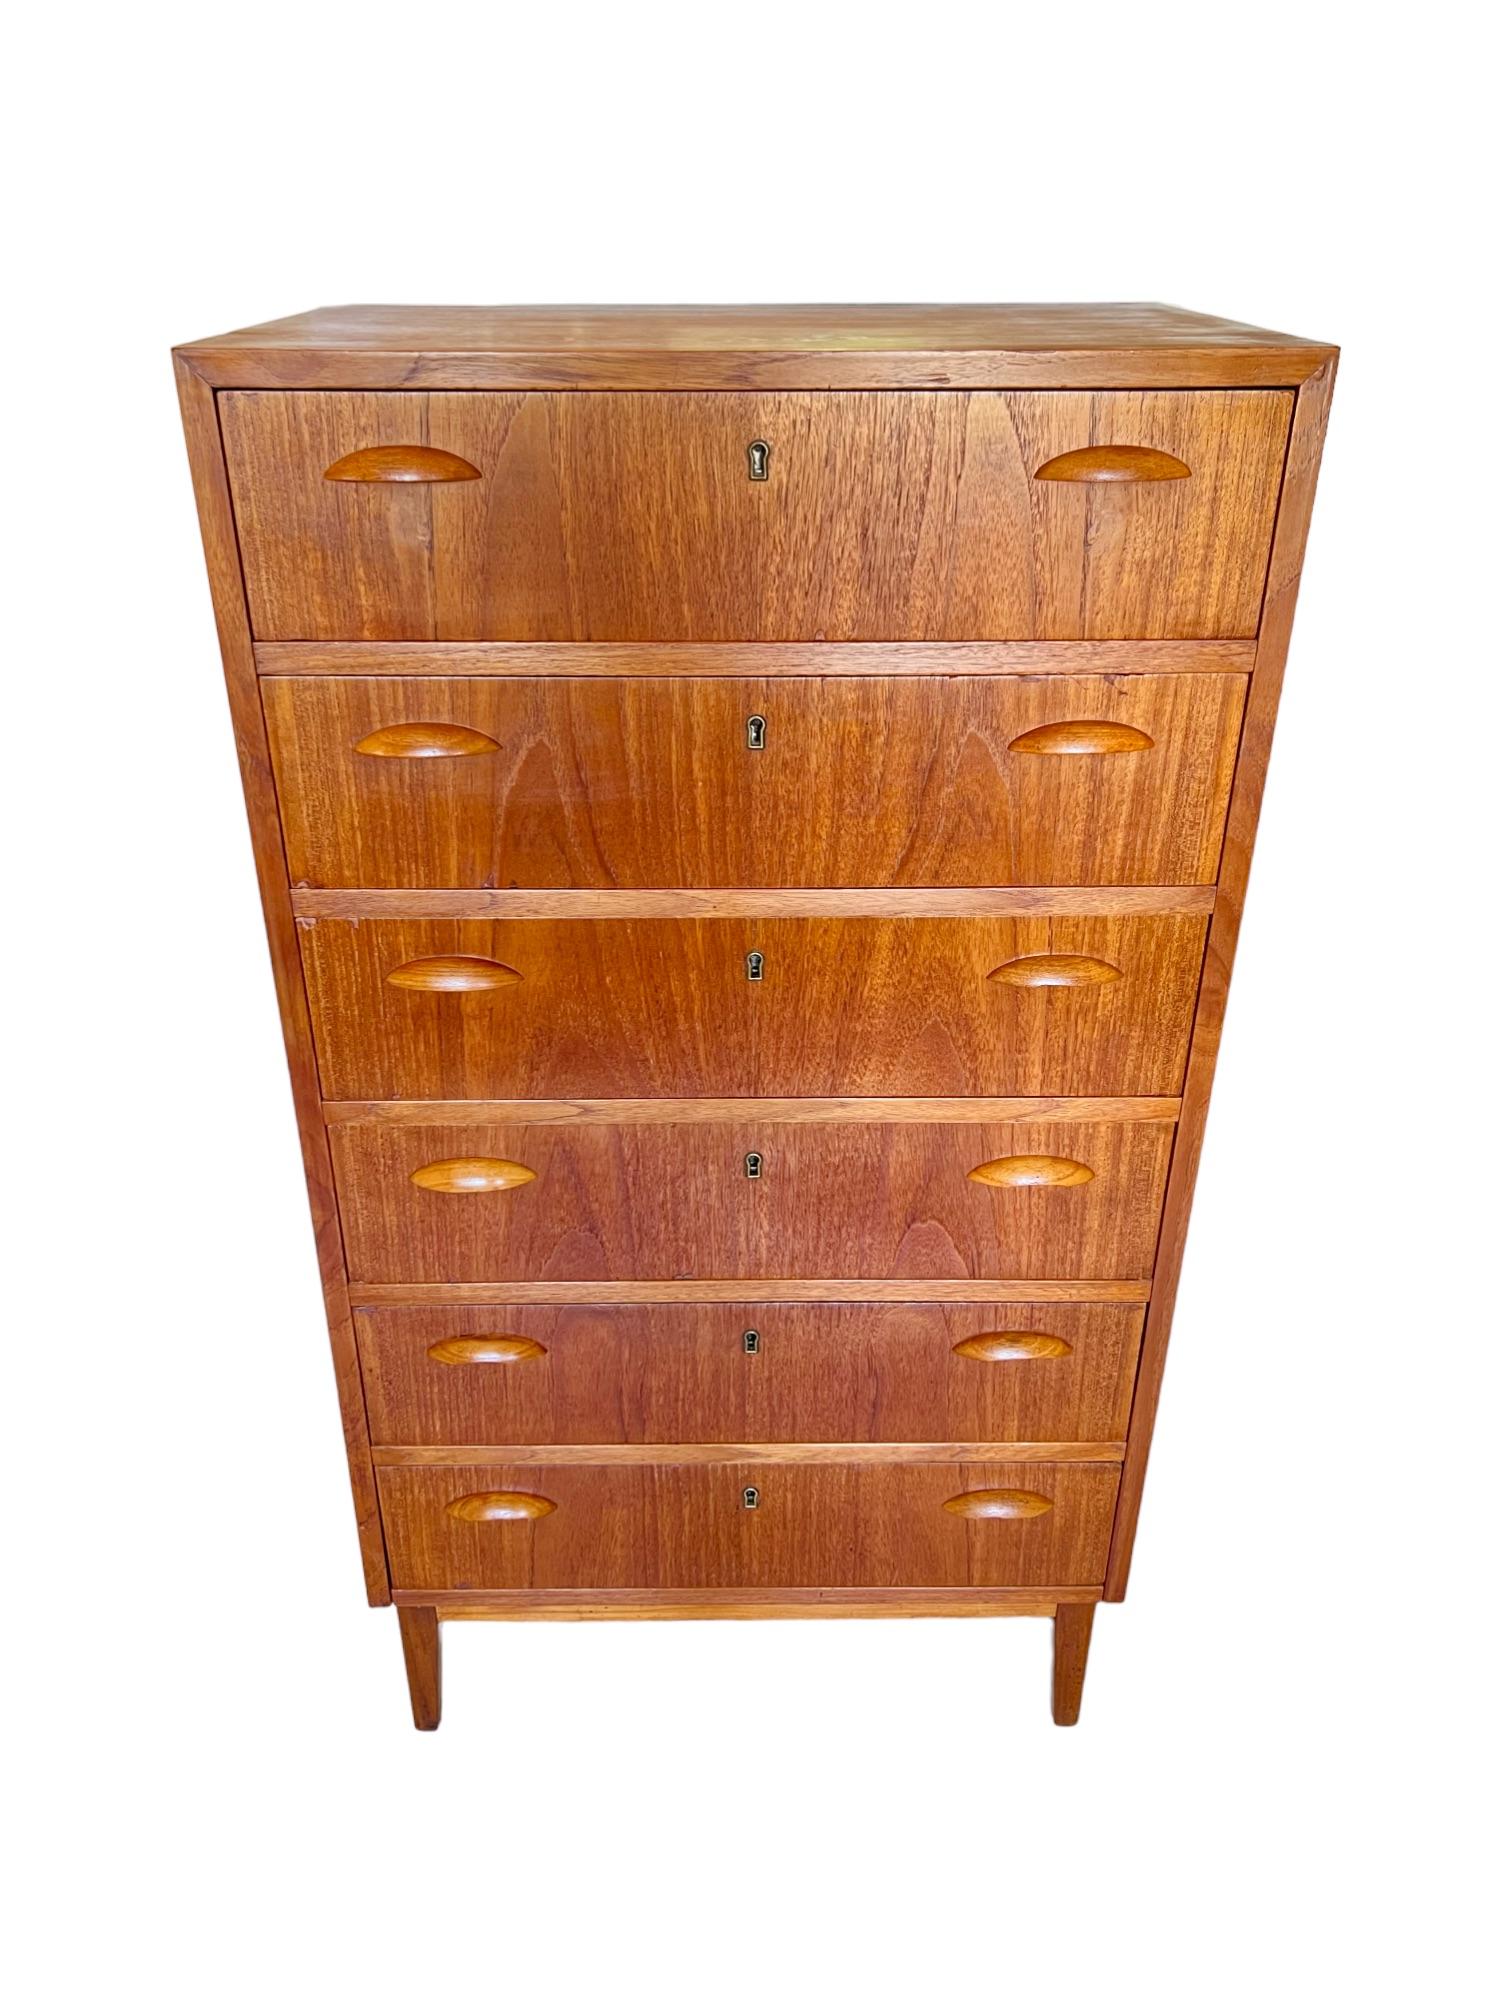 This vintage 1950s mid-century modern highboy dresser features six locking (no key) drawers with sculpted cup pulls and superb dovetail joinery. Constructed of hardwood and teak veneer, it is a relatively lightweight and petite tall chest. It is